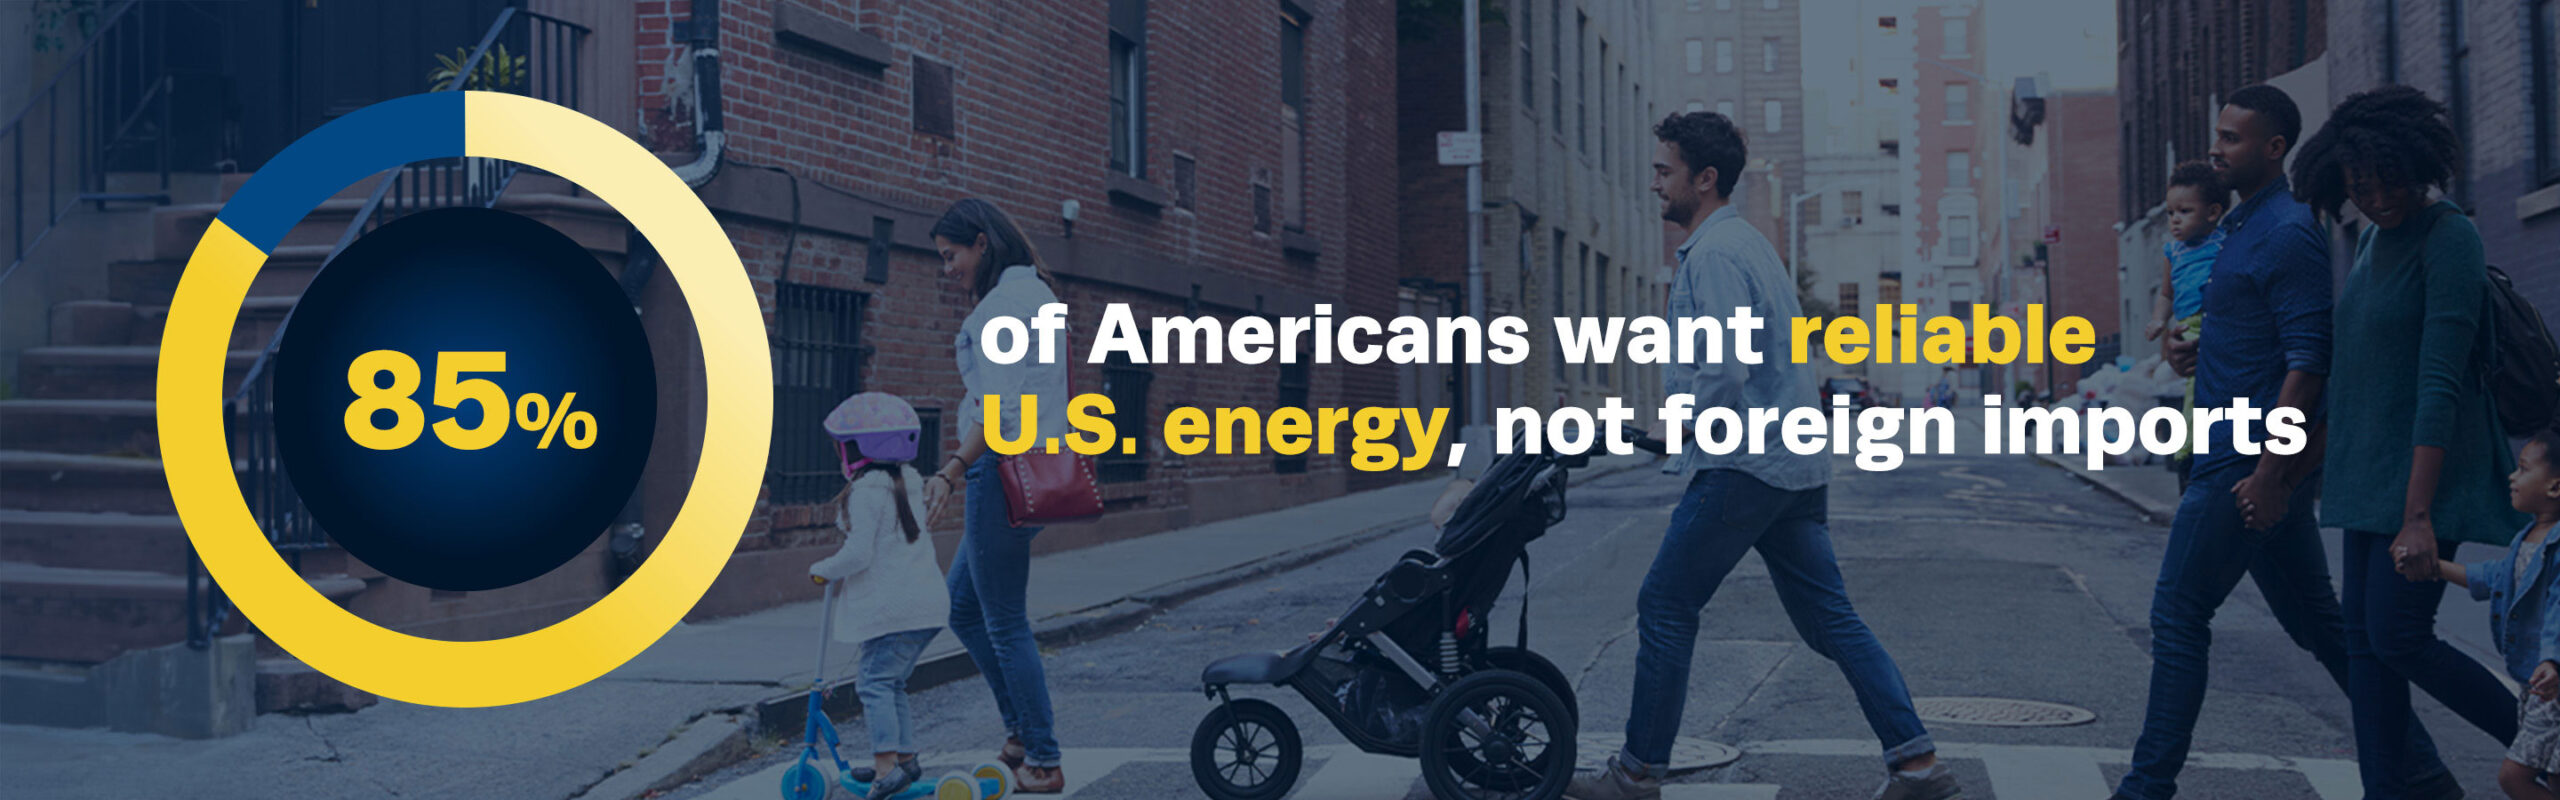 85% of Americans want reliable U.S. energy, not foreign imports